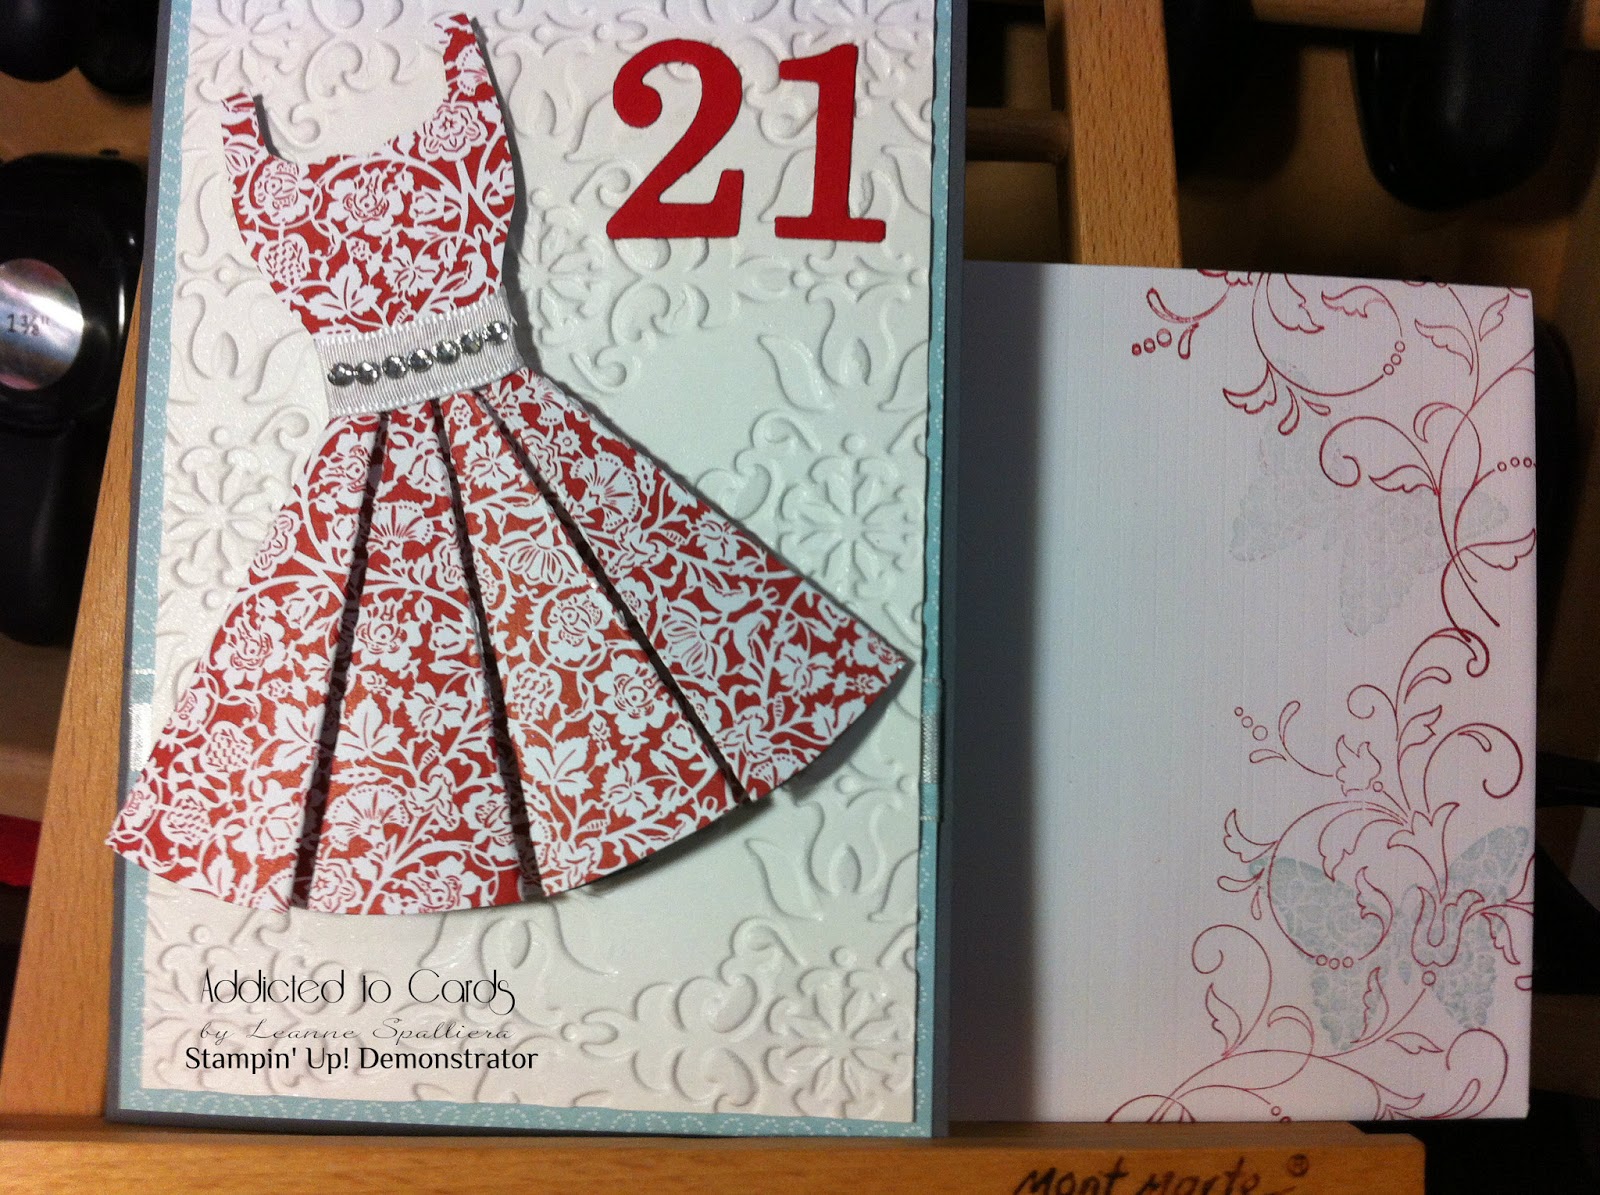 21st-birthday-card-for-a-friend-verse-by-marion-emberson-of-sugar